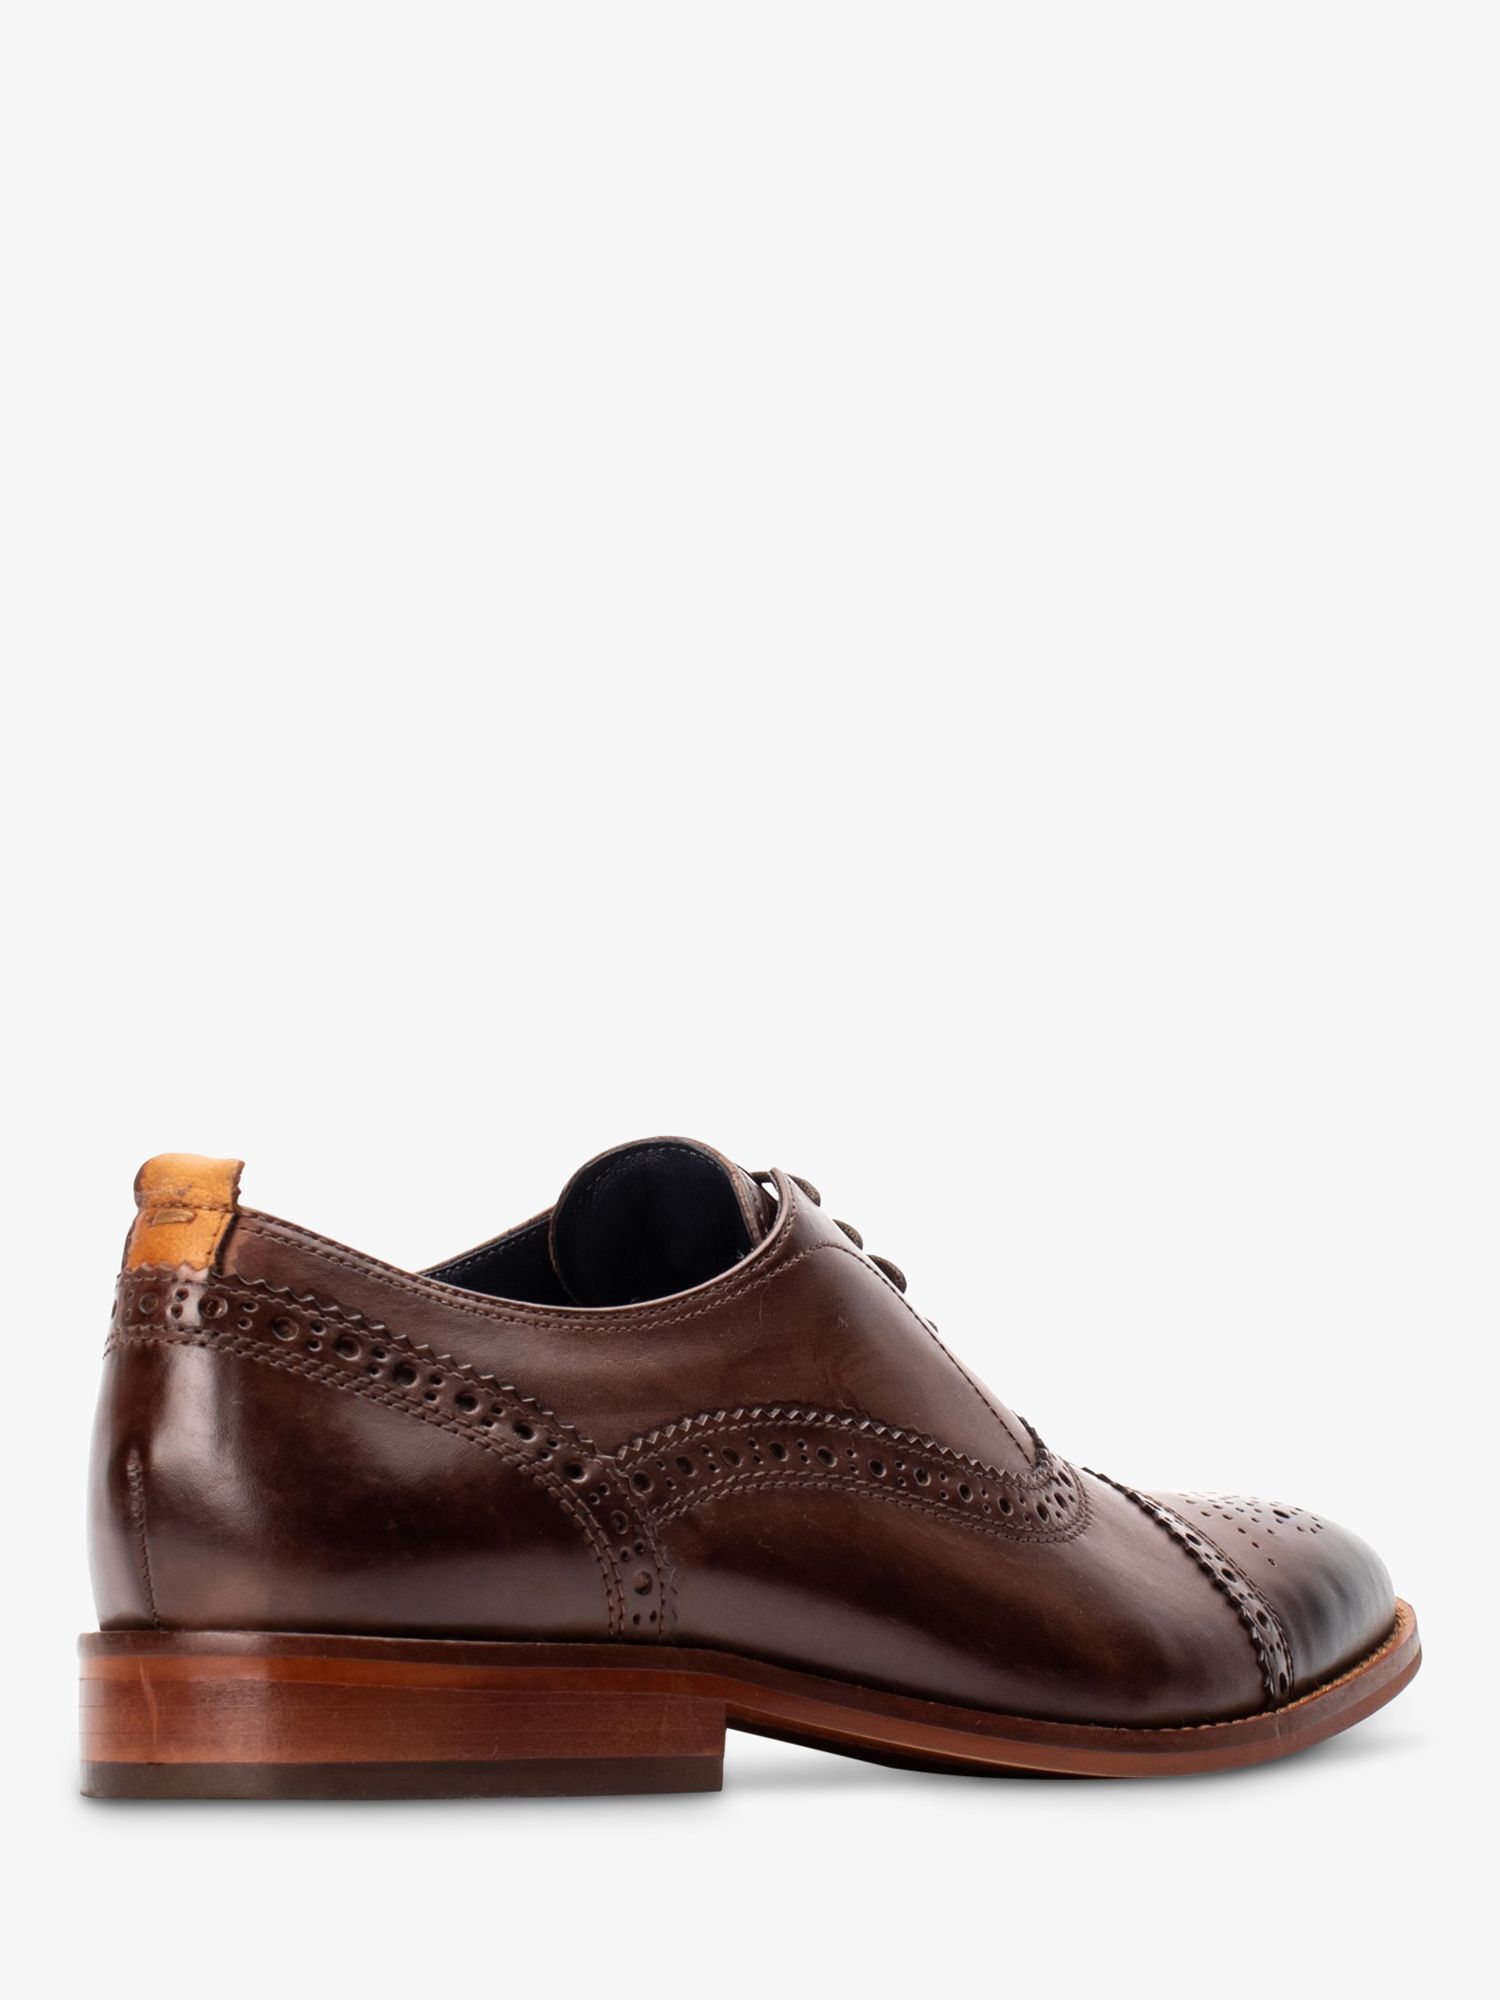 Base London Cast Washed Brogue Shoes, Brown, 9